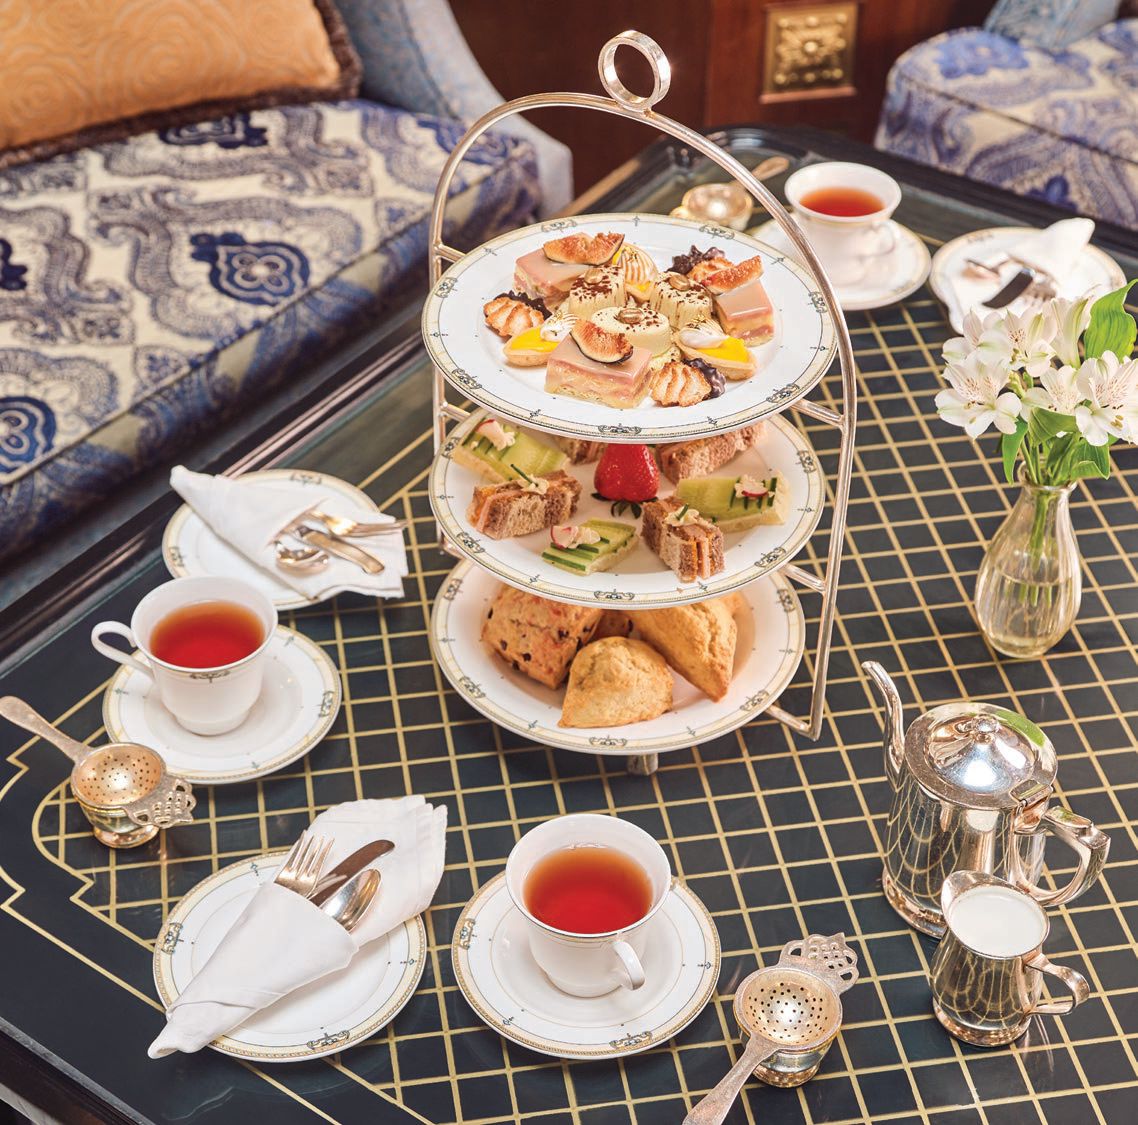 The Brown Palace Hotel & Spa offers daily formal tea service PHOTO COURTESY OF THE BROWN PALACE HOTEL & SPA, AUTOGRAPH COLLECTION